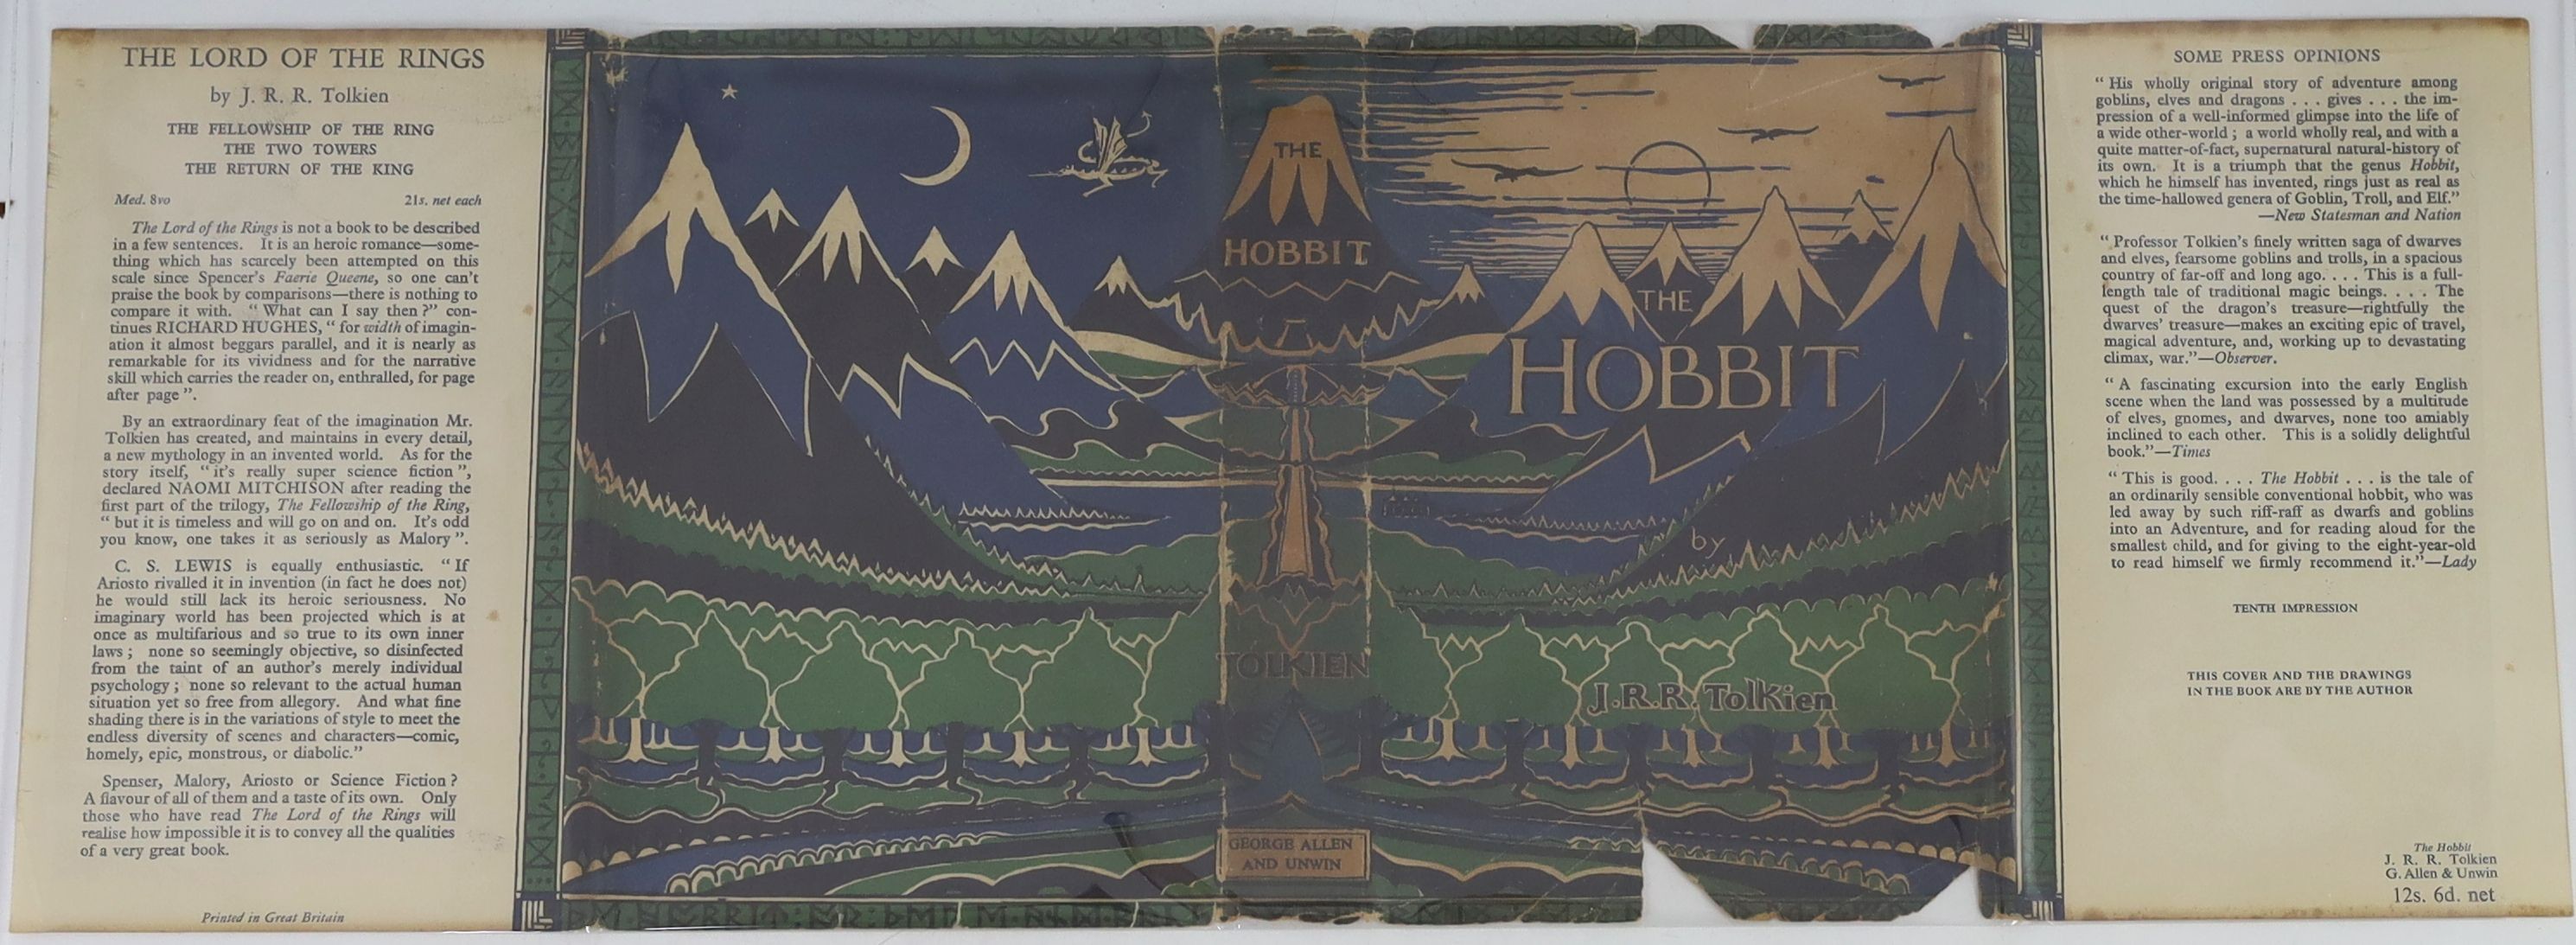 Tolkien, John Ronald Reuel - The Hobbit, 2nd edition, 10th impression, with colour frontispiece, map endpapers, original green cloth in unclipped d/j, with small loss to lower front panel and top edge, George Allen and U